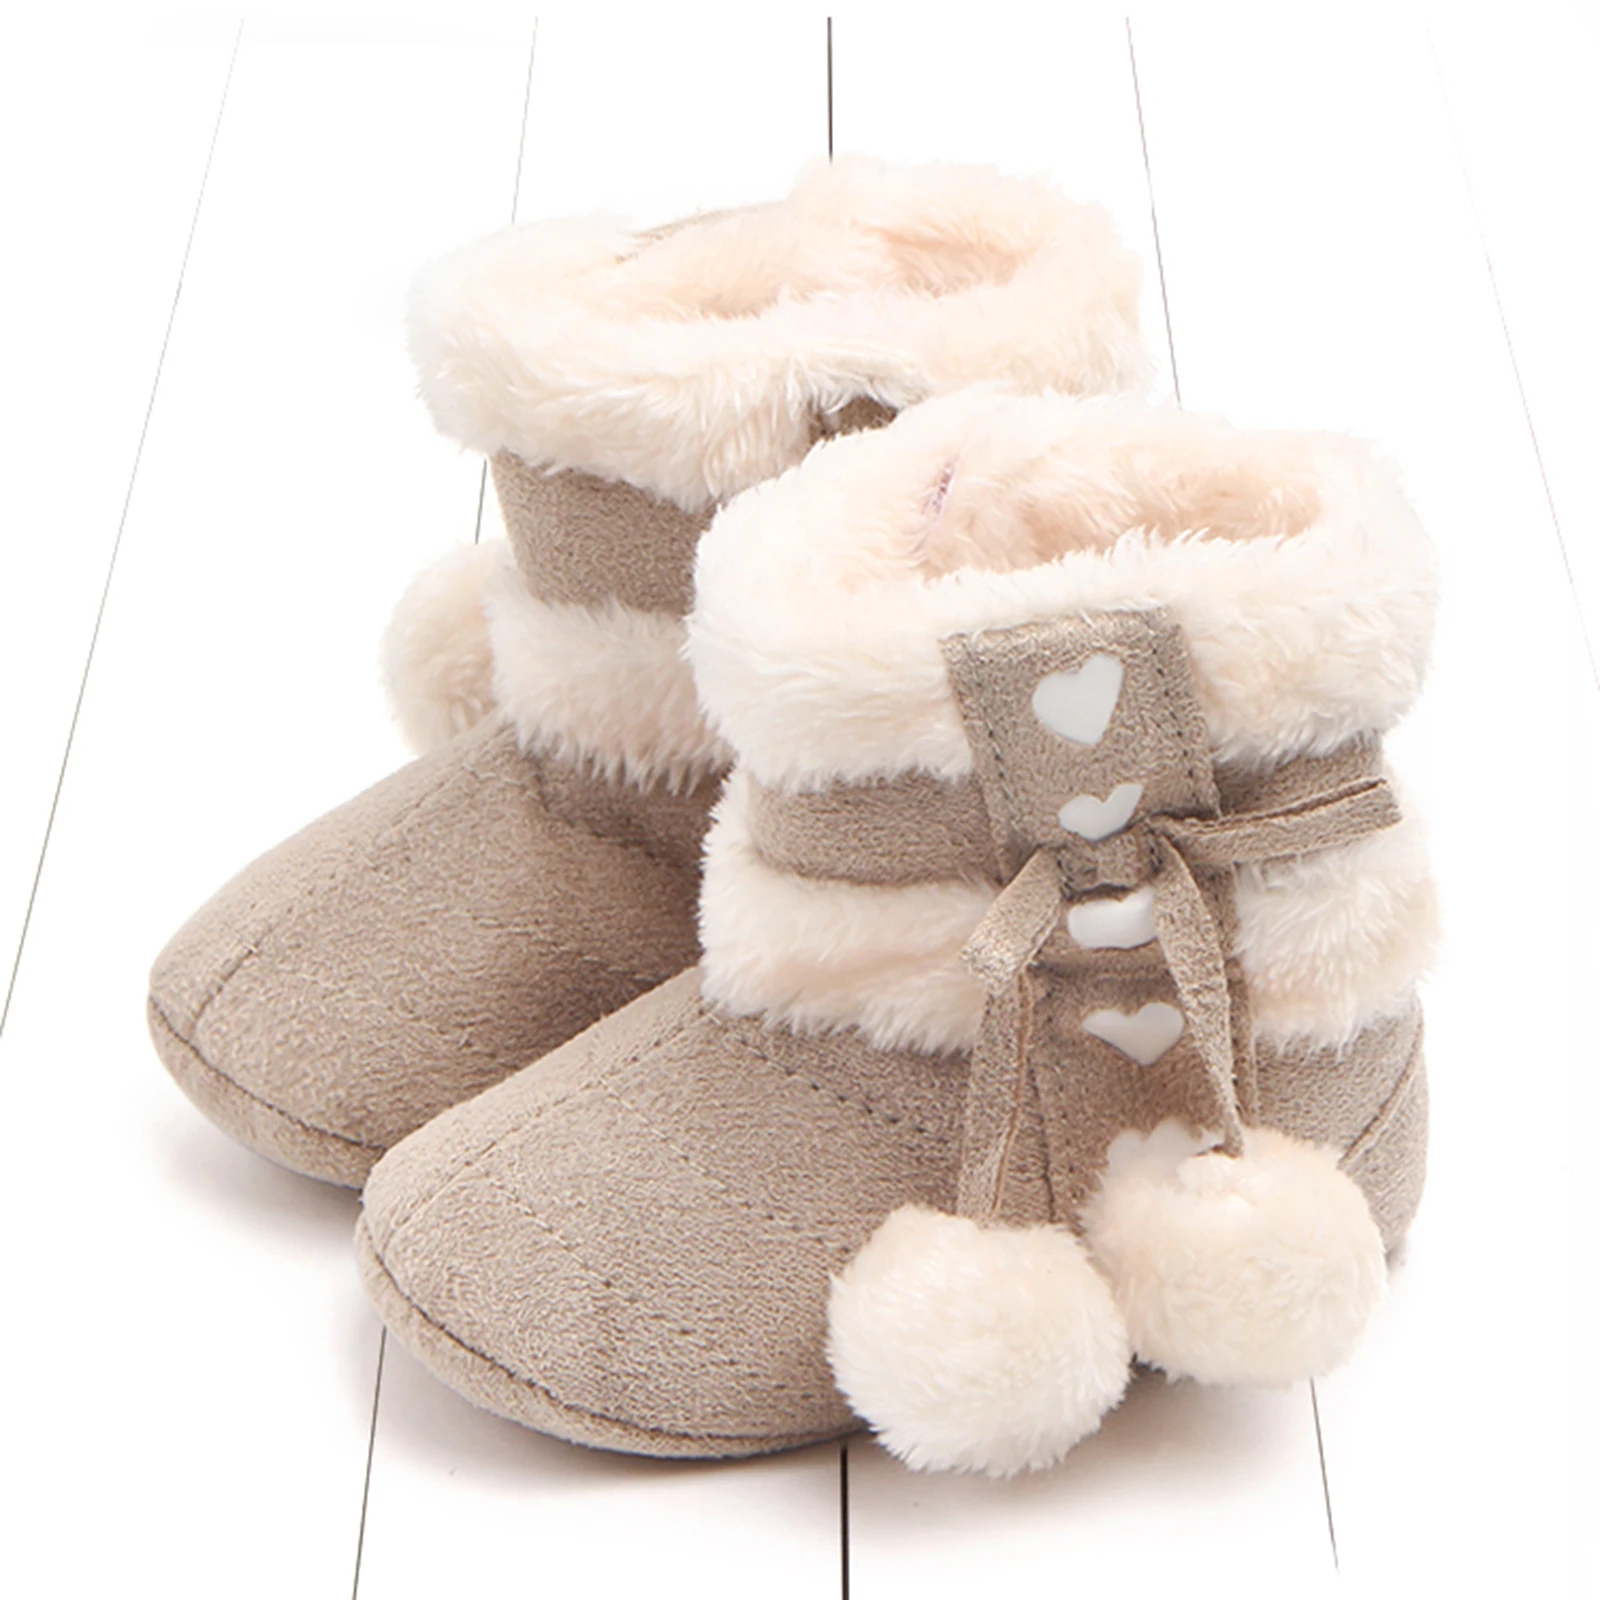 Newborn Baby Girls Winter Boots Cute Bow Plush Pom Snow Shoes Warm Baby Walking Shoes for Toddler Infant